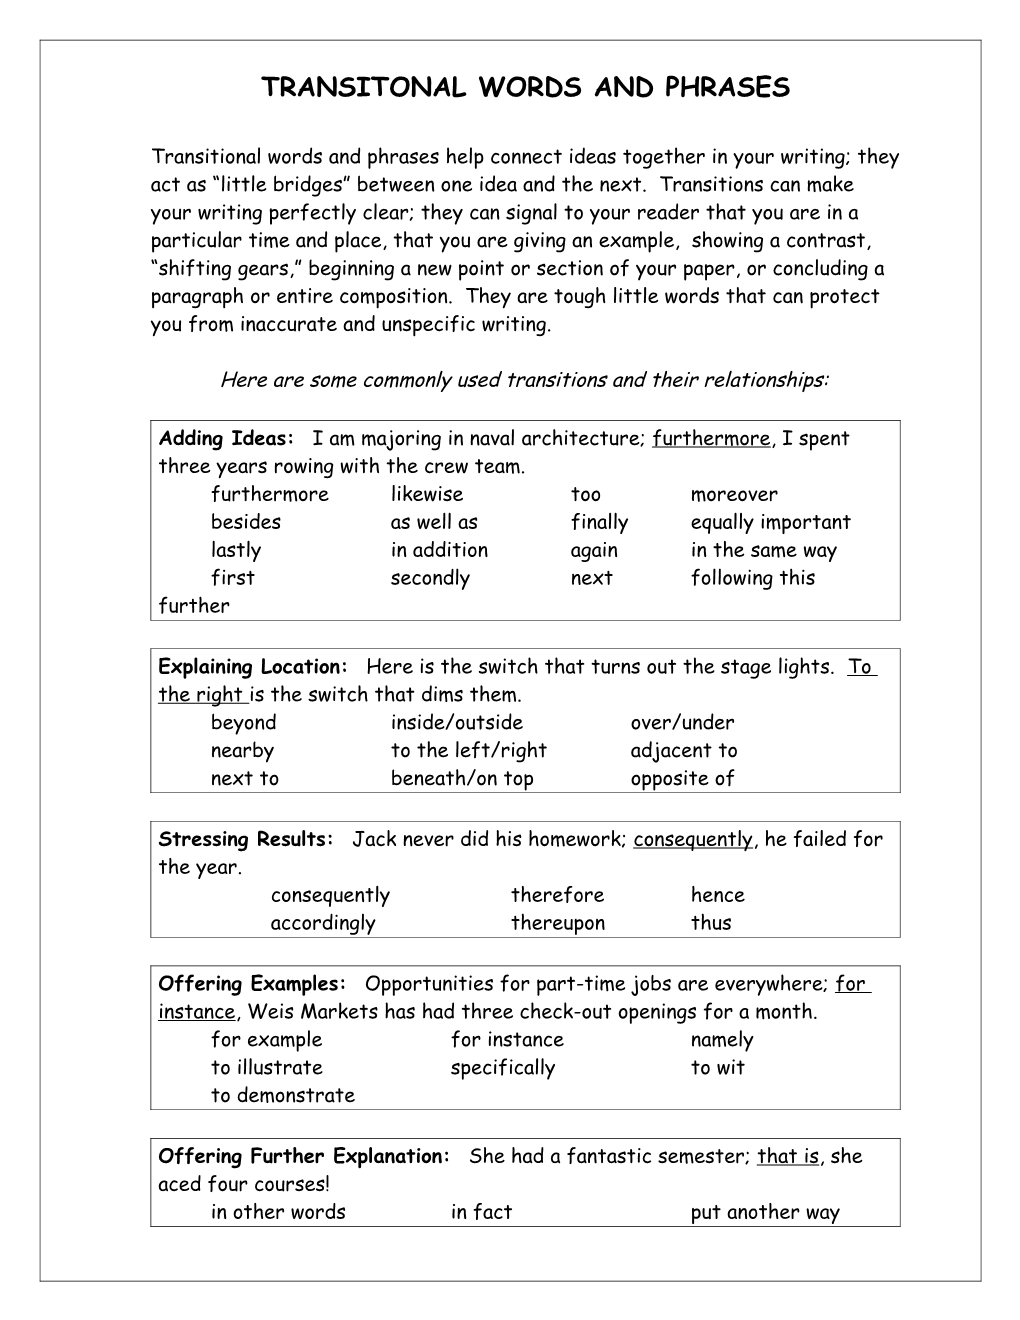 Transitonal Words and Phrases